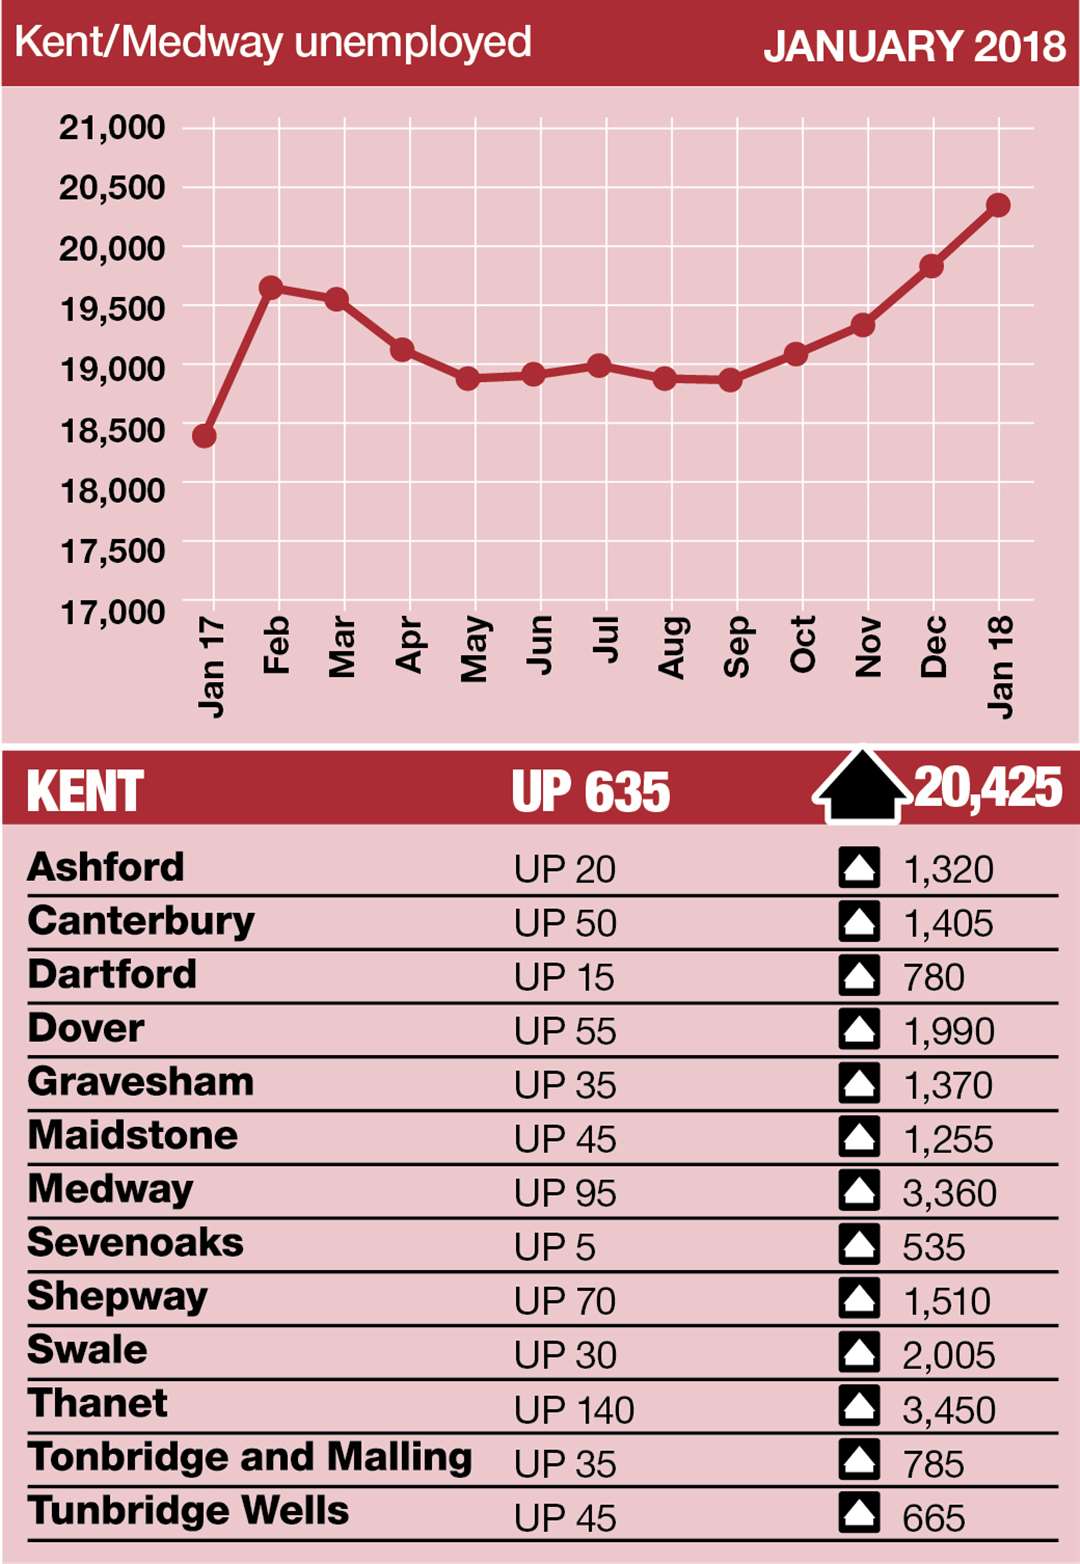 It is the fourth straight month the number of claimants in Kent has risen